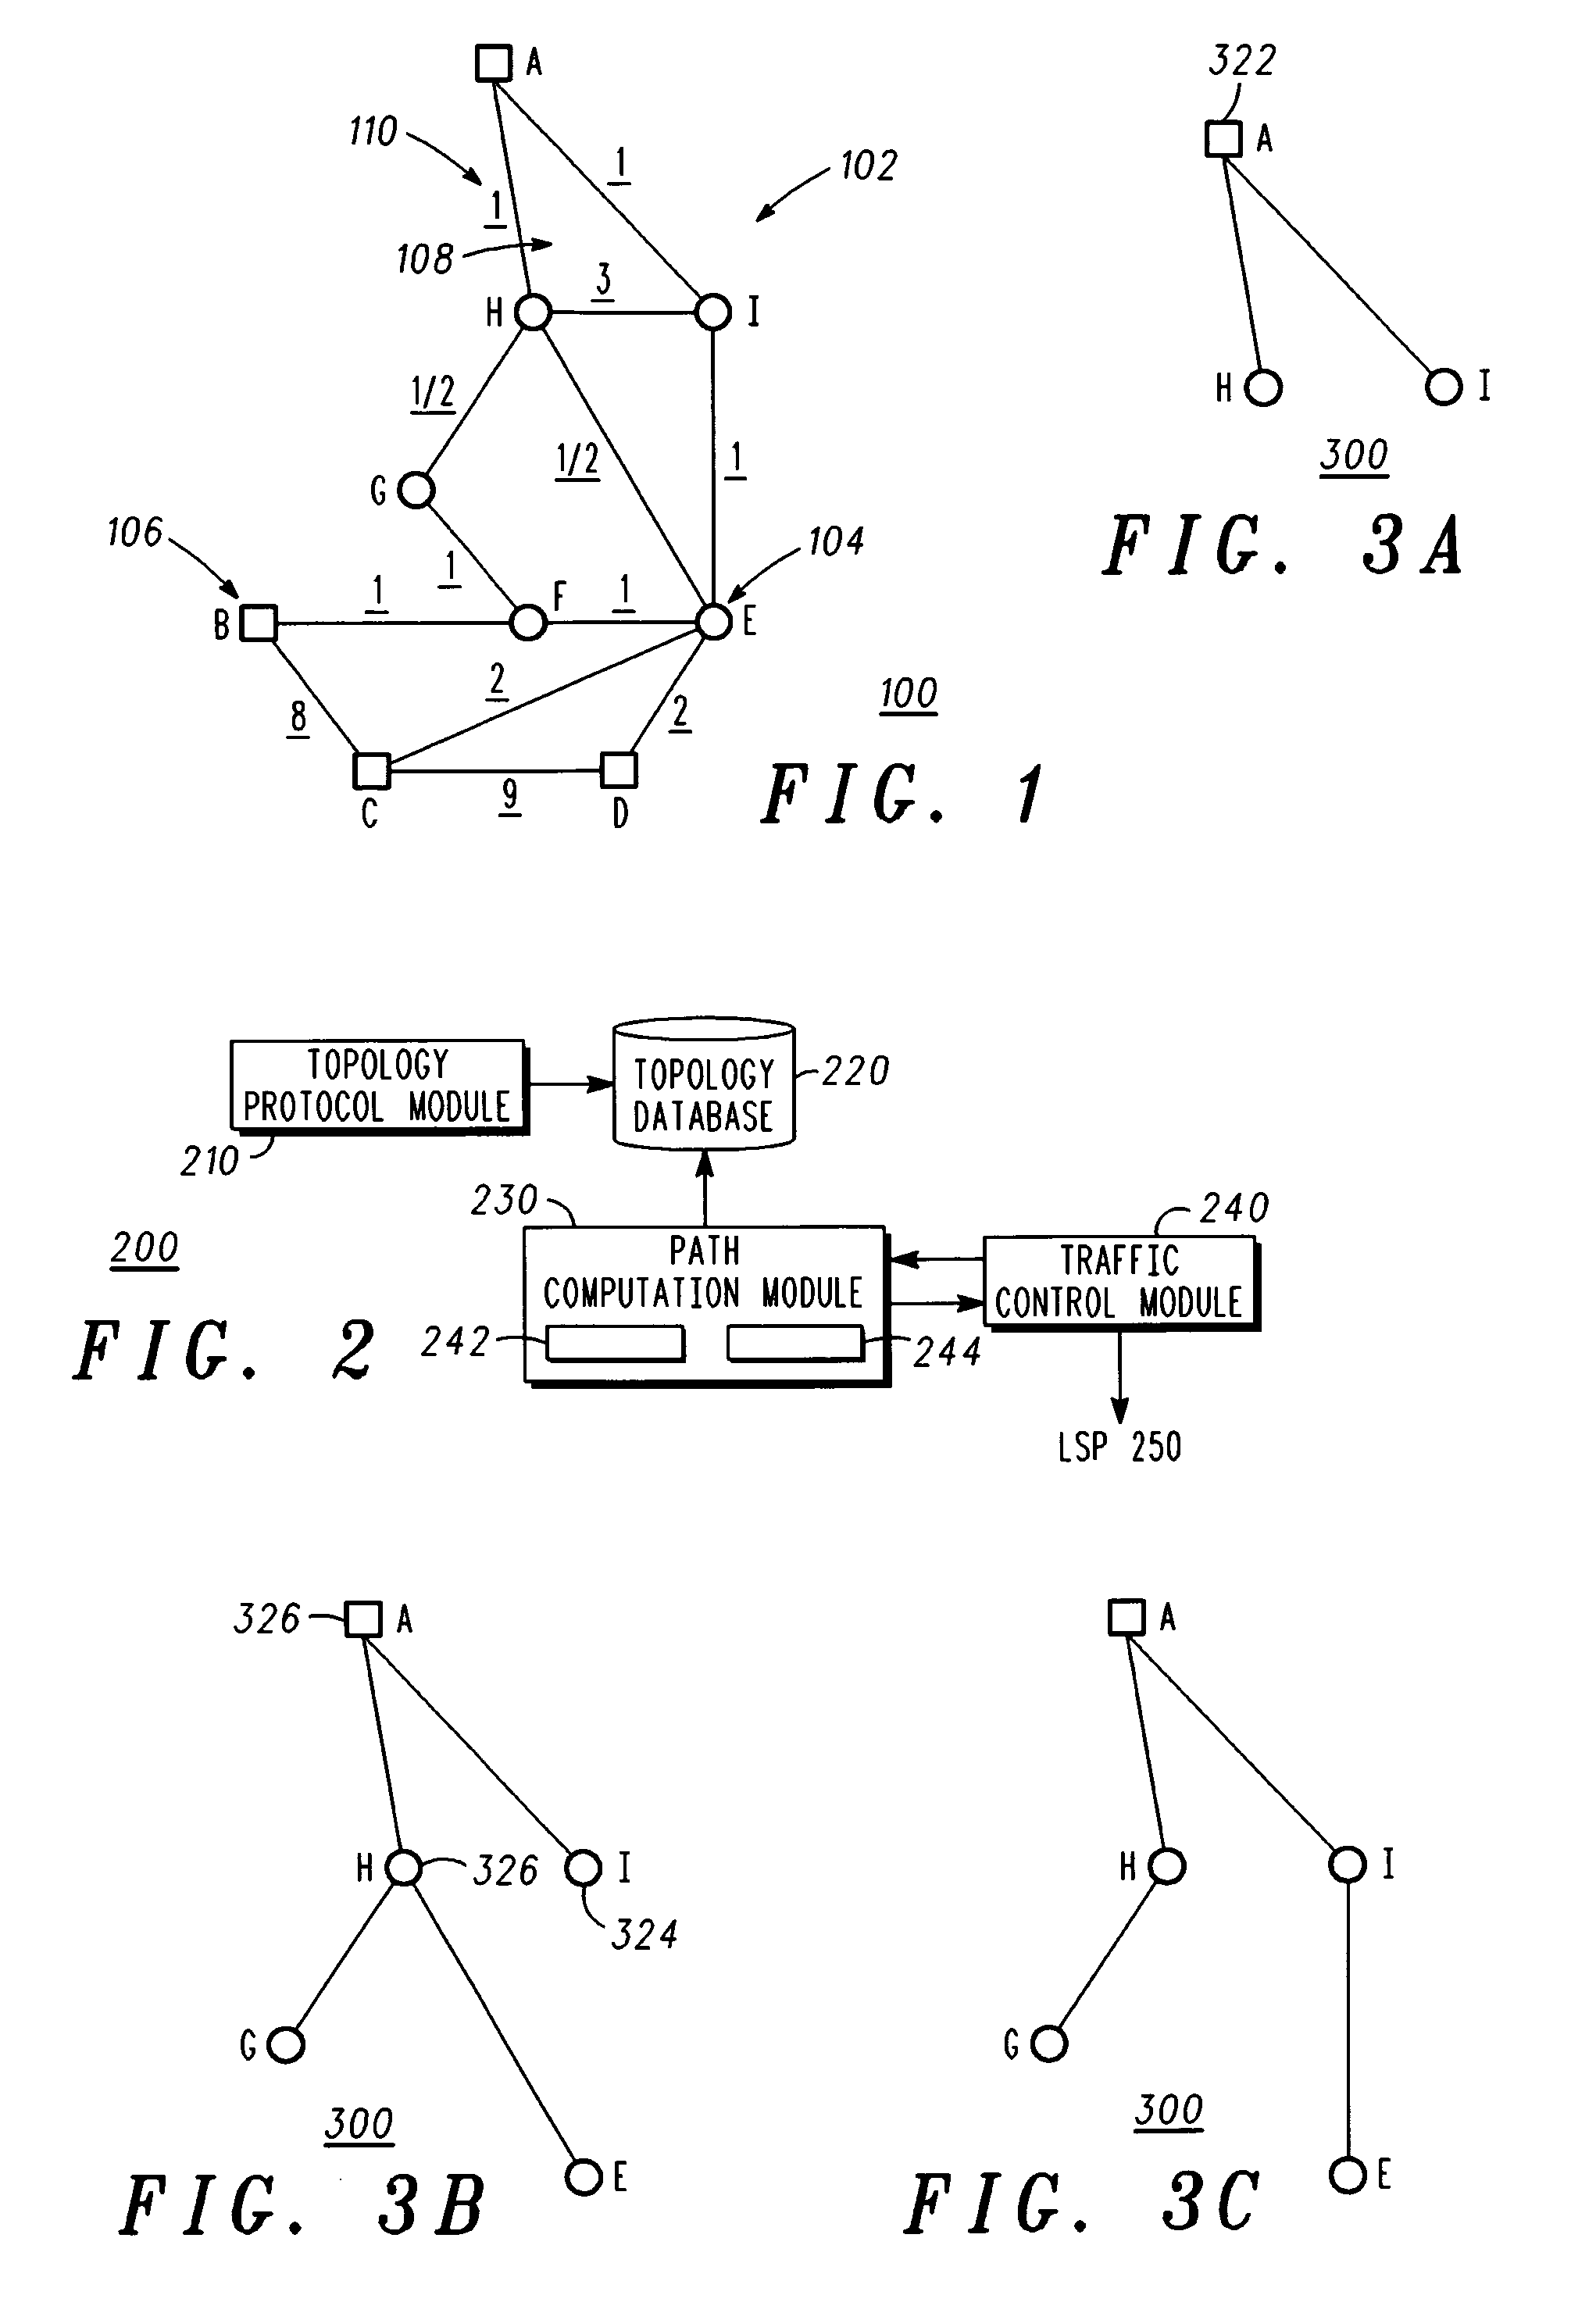 Method and apparatus for generating a degree-constrained minimum spanning tree